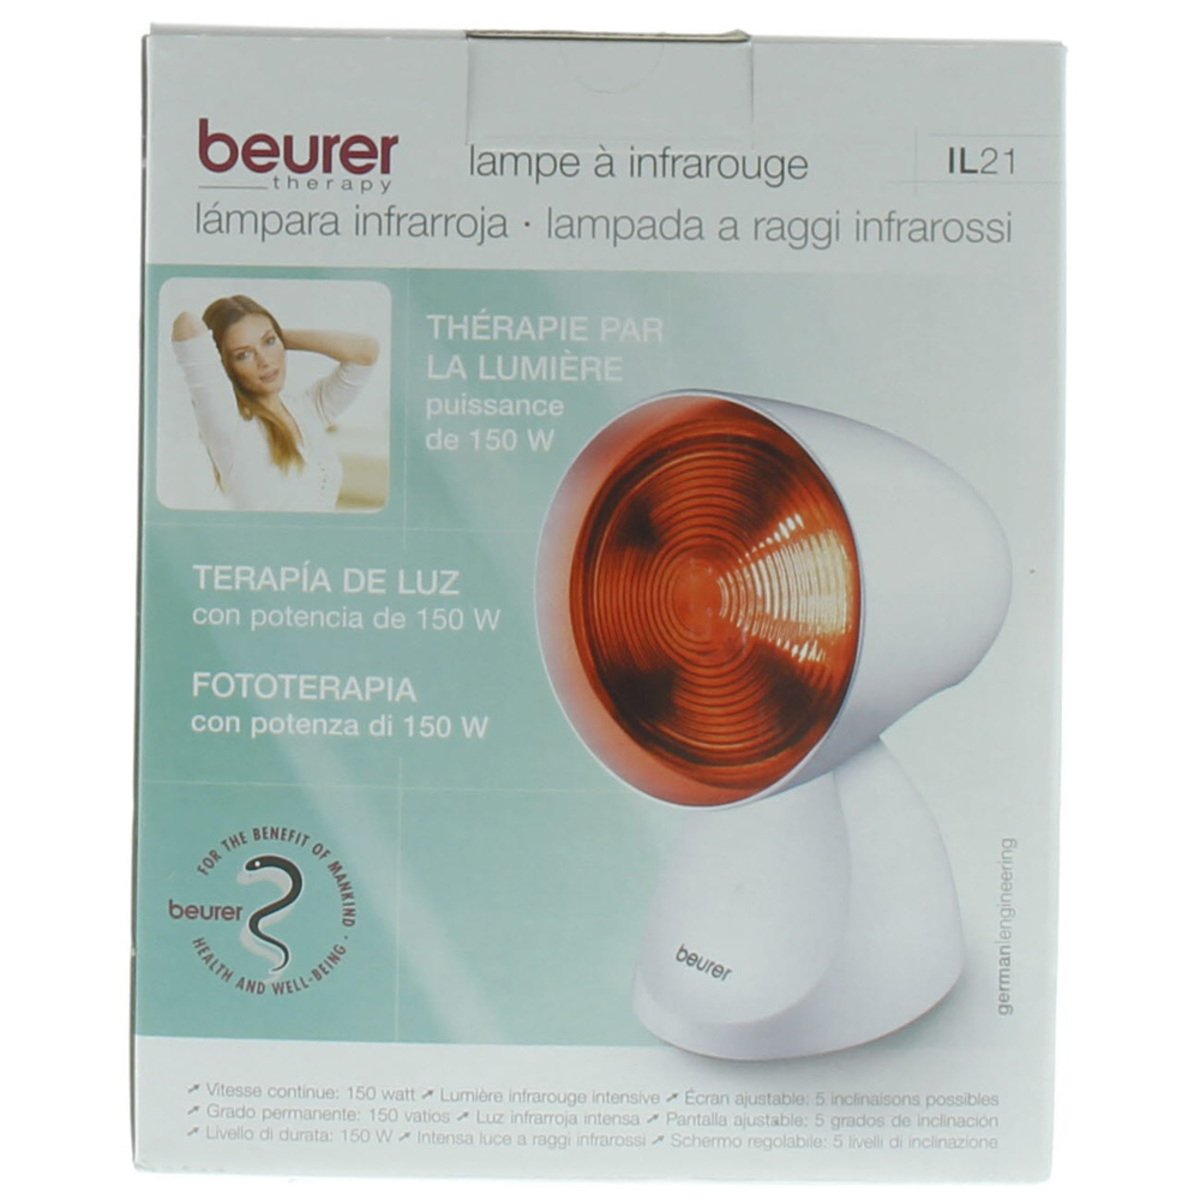 Beurer Infrared Lamp IL21